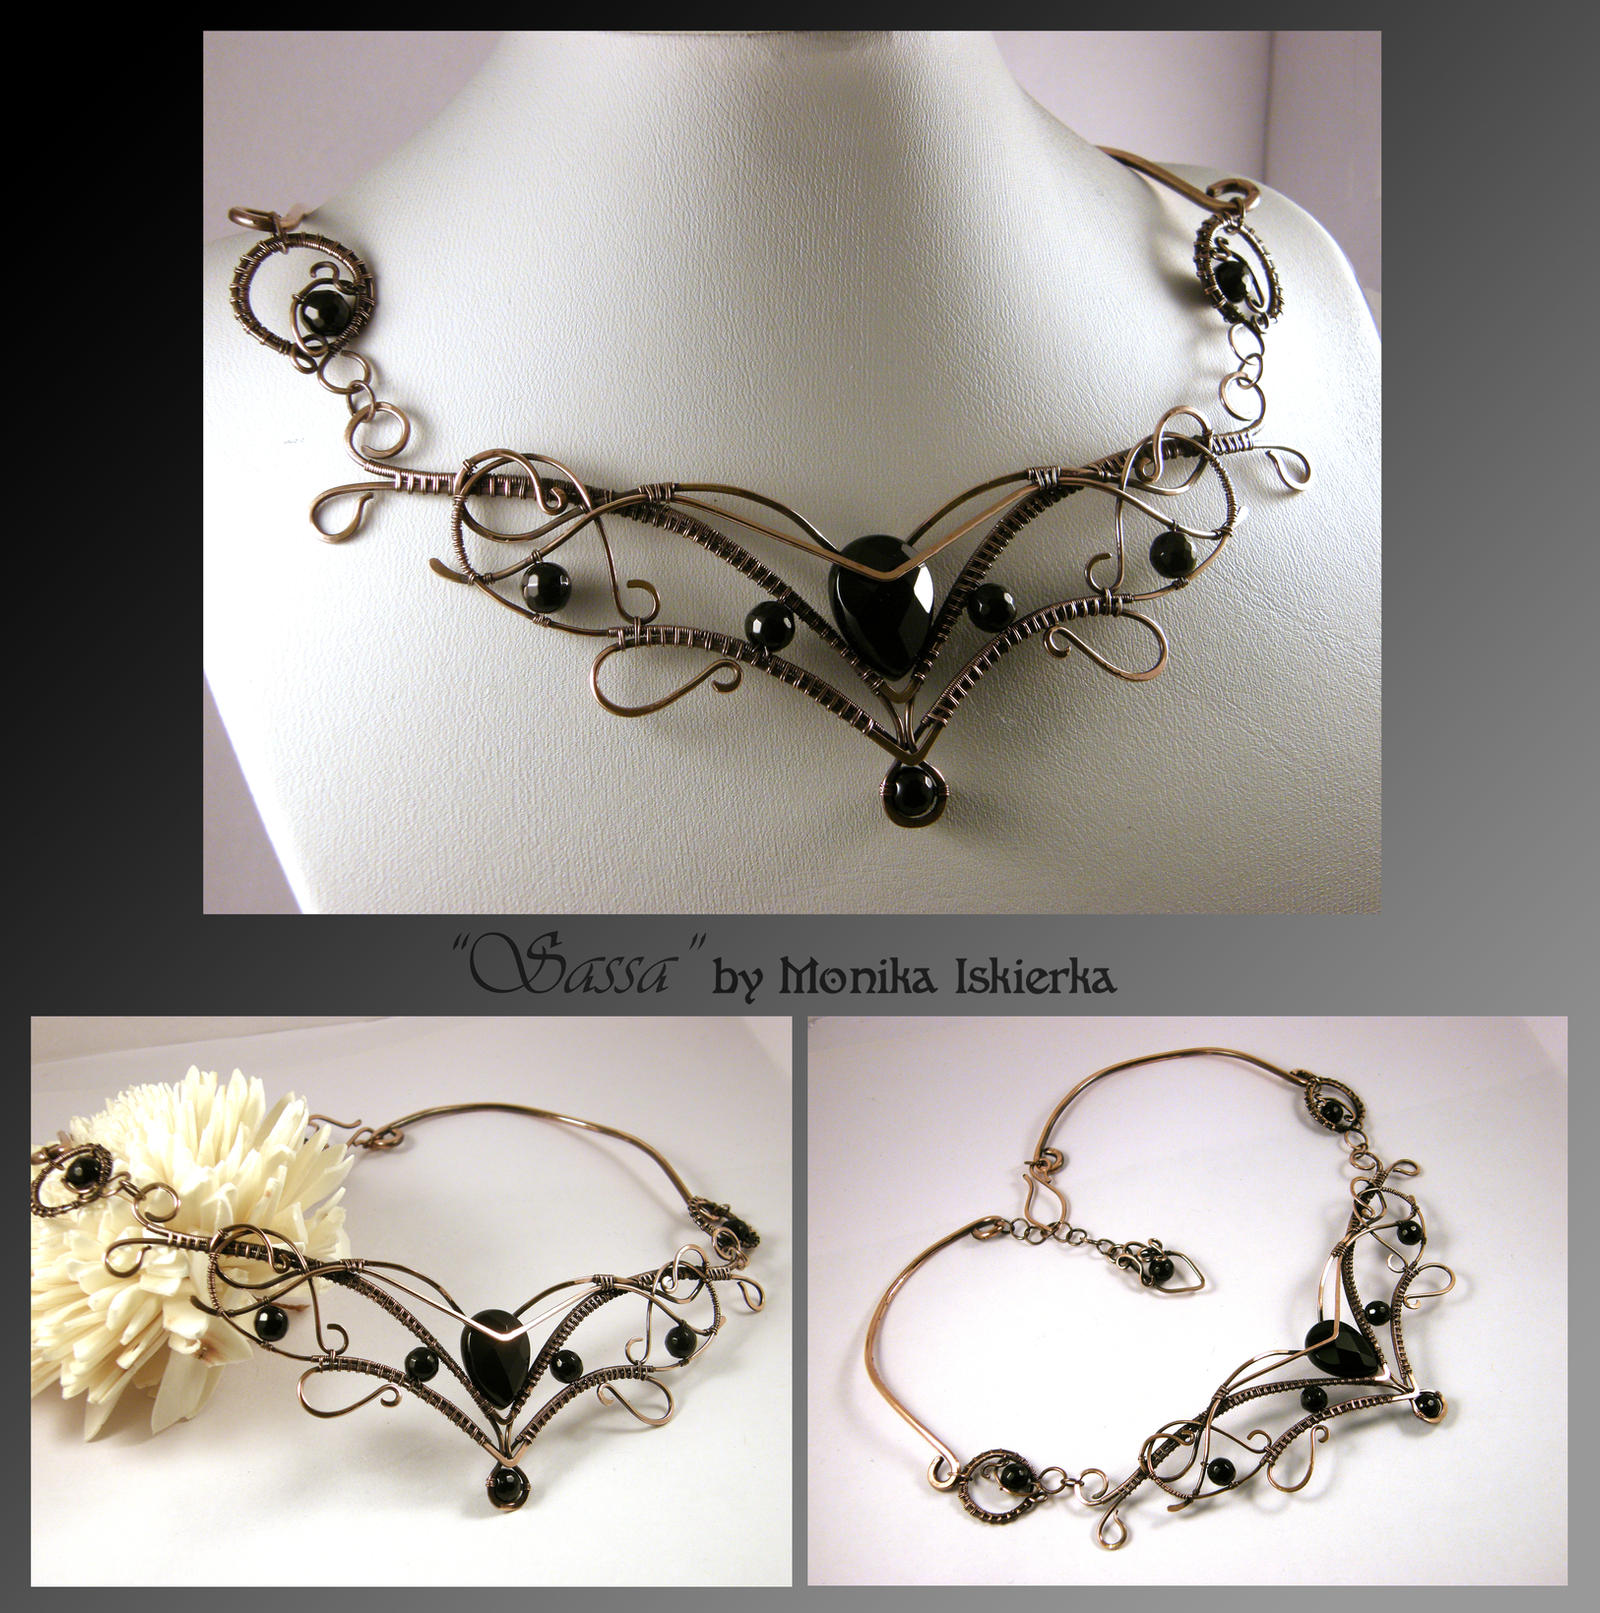 Sassa- wire wrapped necklace